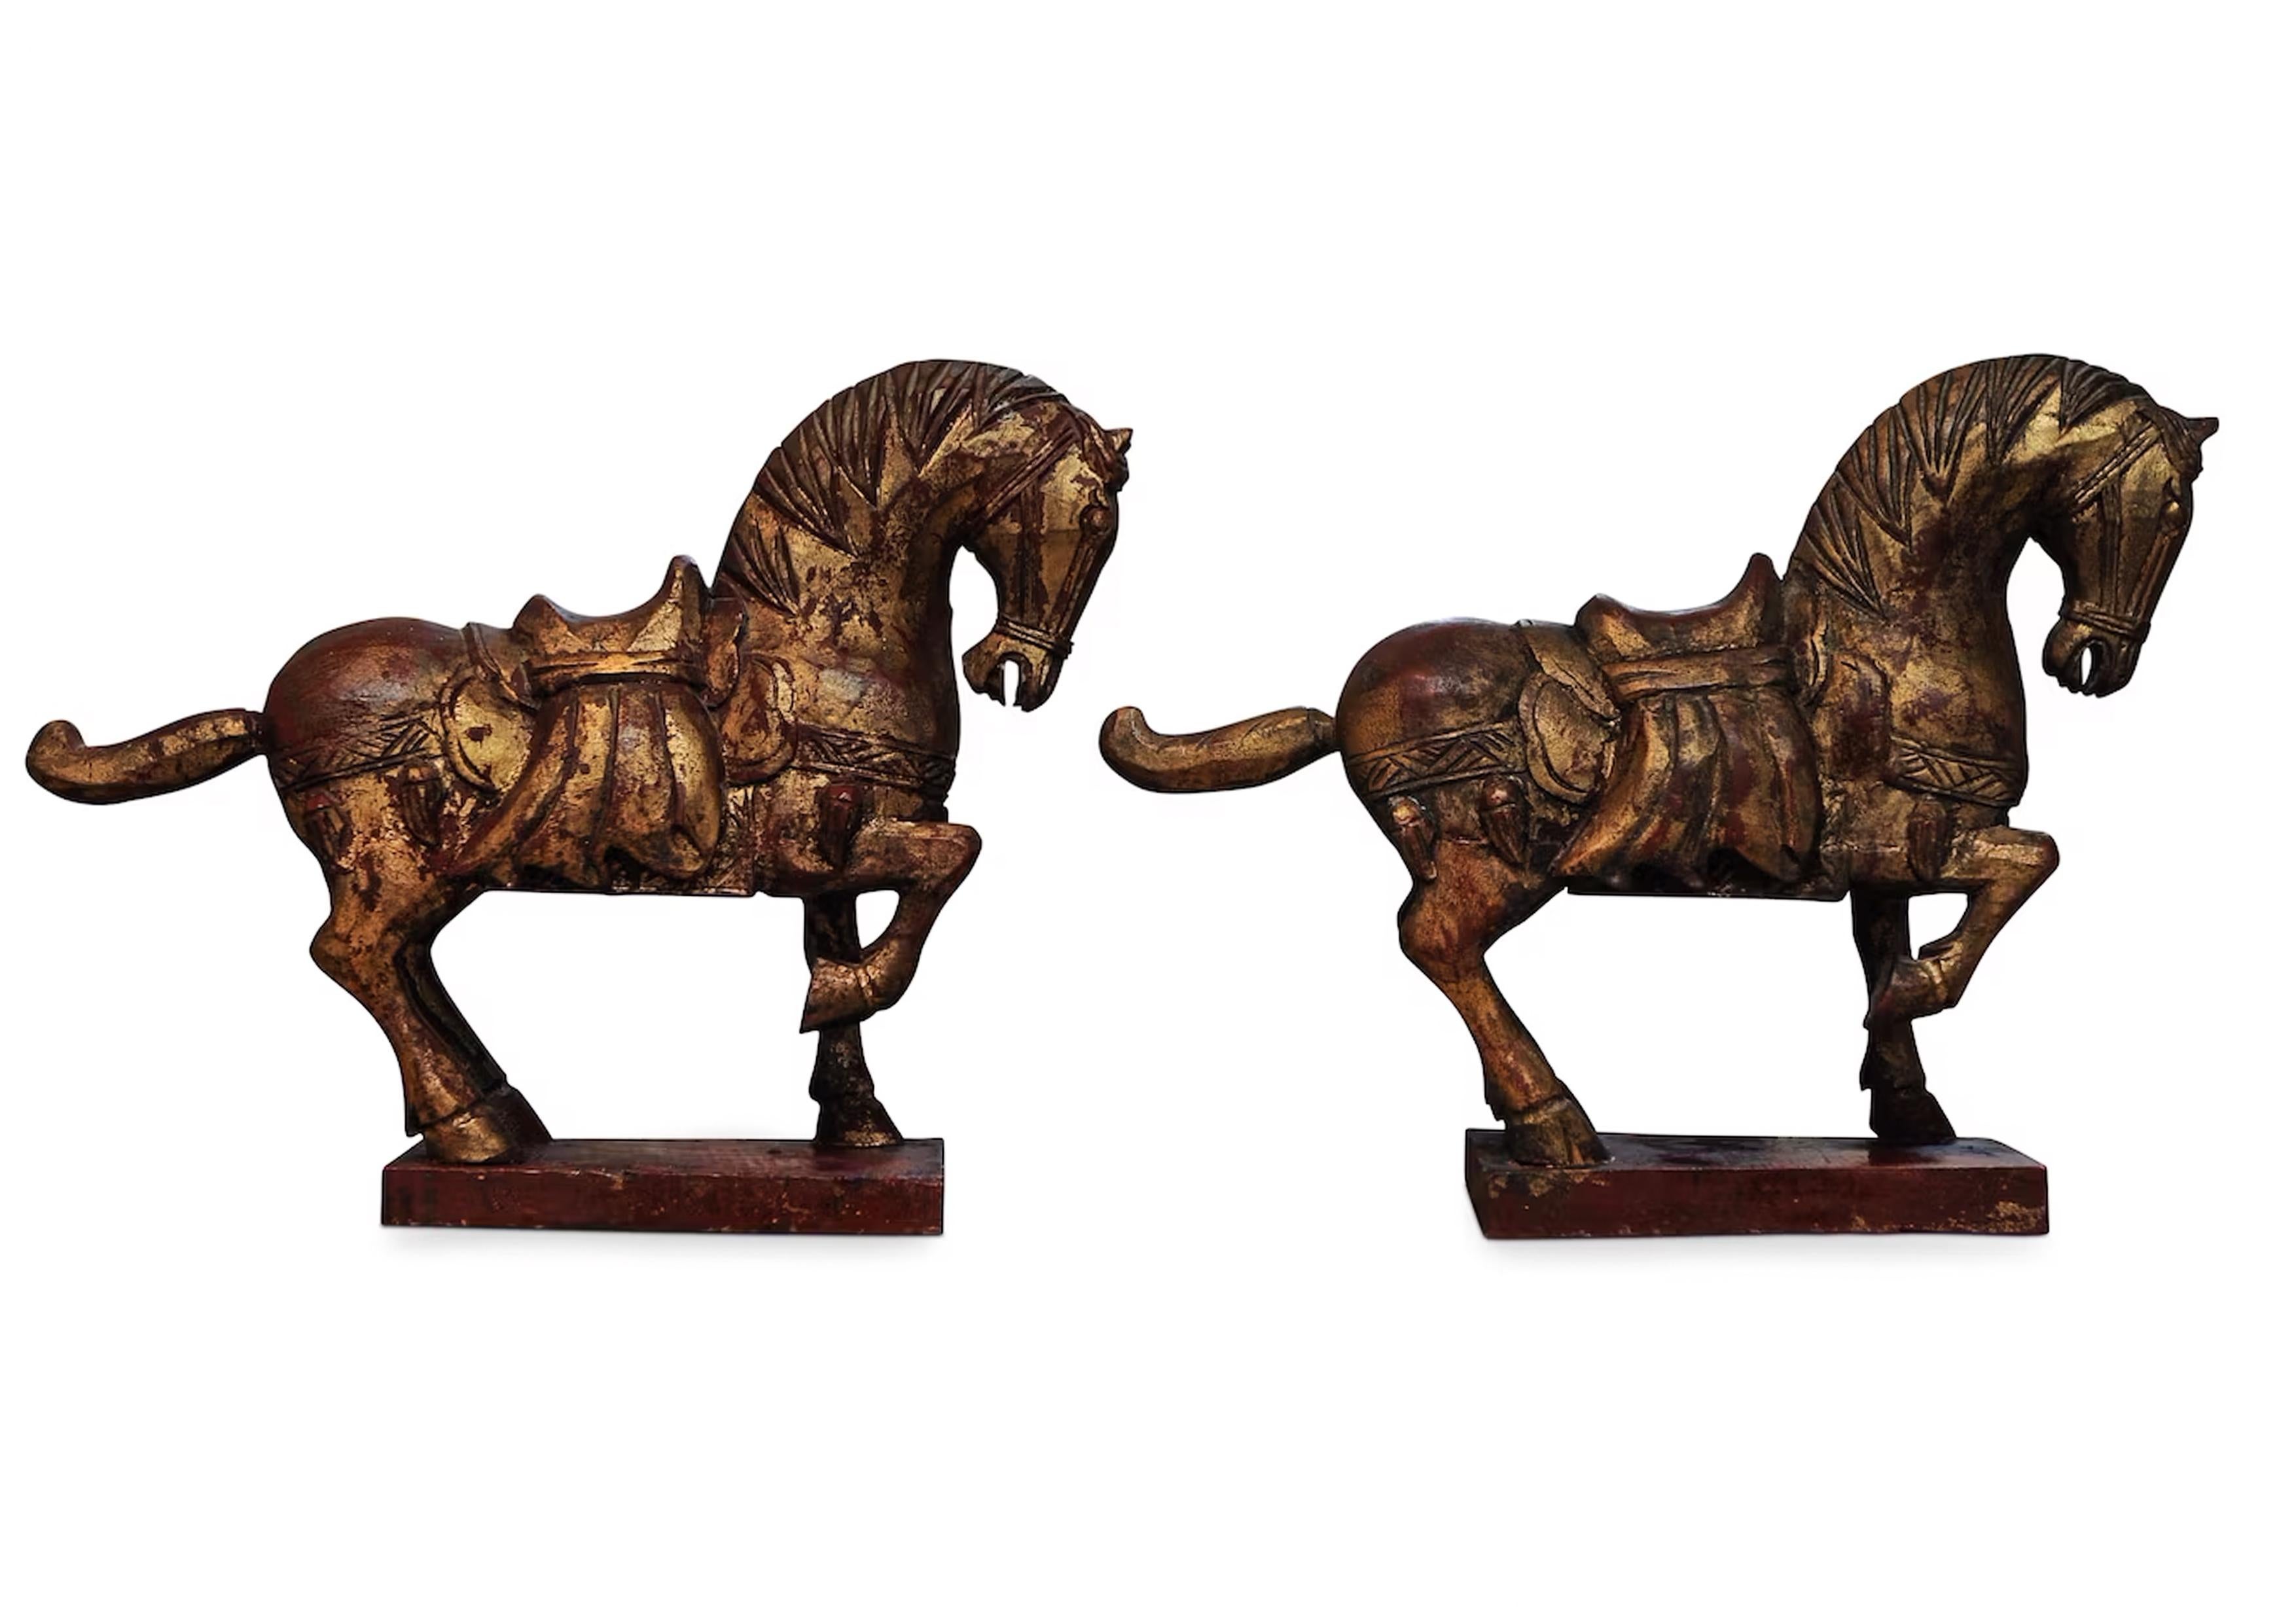 A Vibrant Pair of Tang Dynasty Style Hand Painted & Hand Carved Chinese Horses - priced as a pair 

Decorative wooden horses that would suitably adorn a shelf, a large desk, or plinth. 

Dimensions of each horse 
Height 25cm
Width 33cm 
Depth of